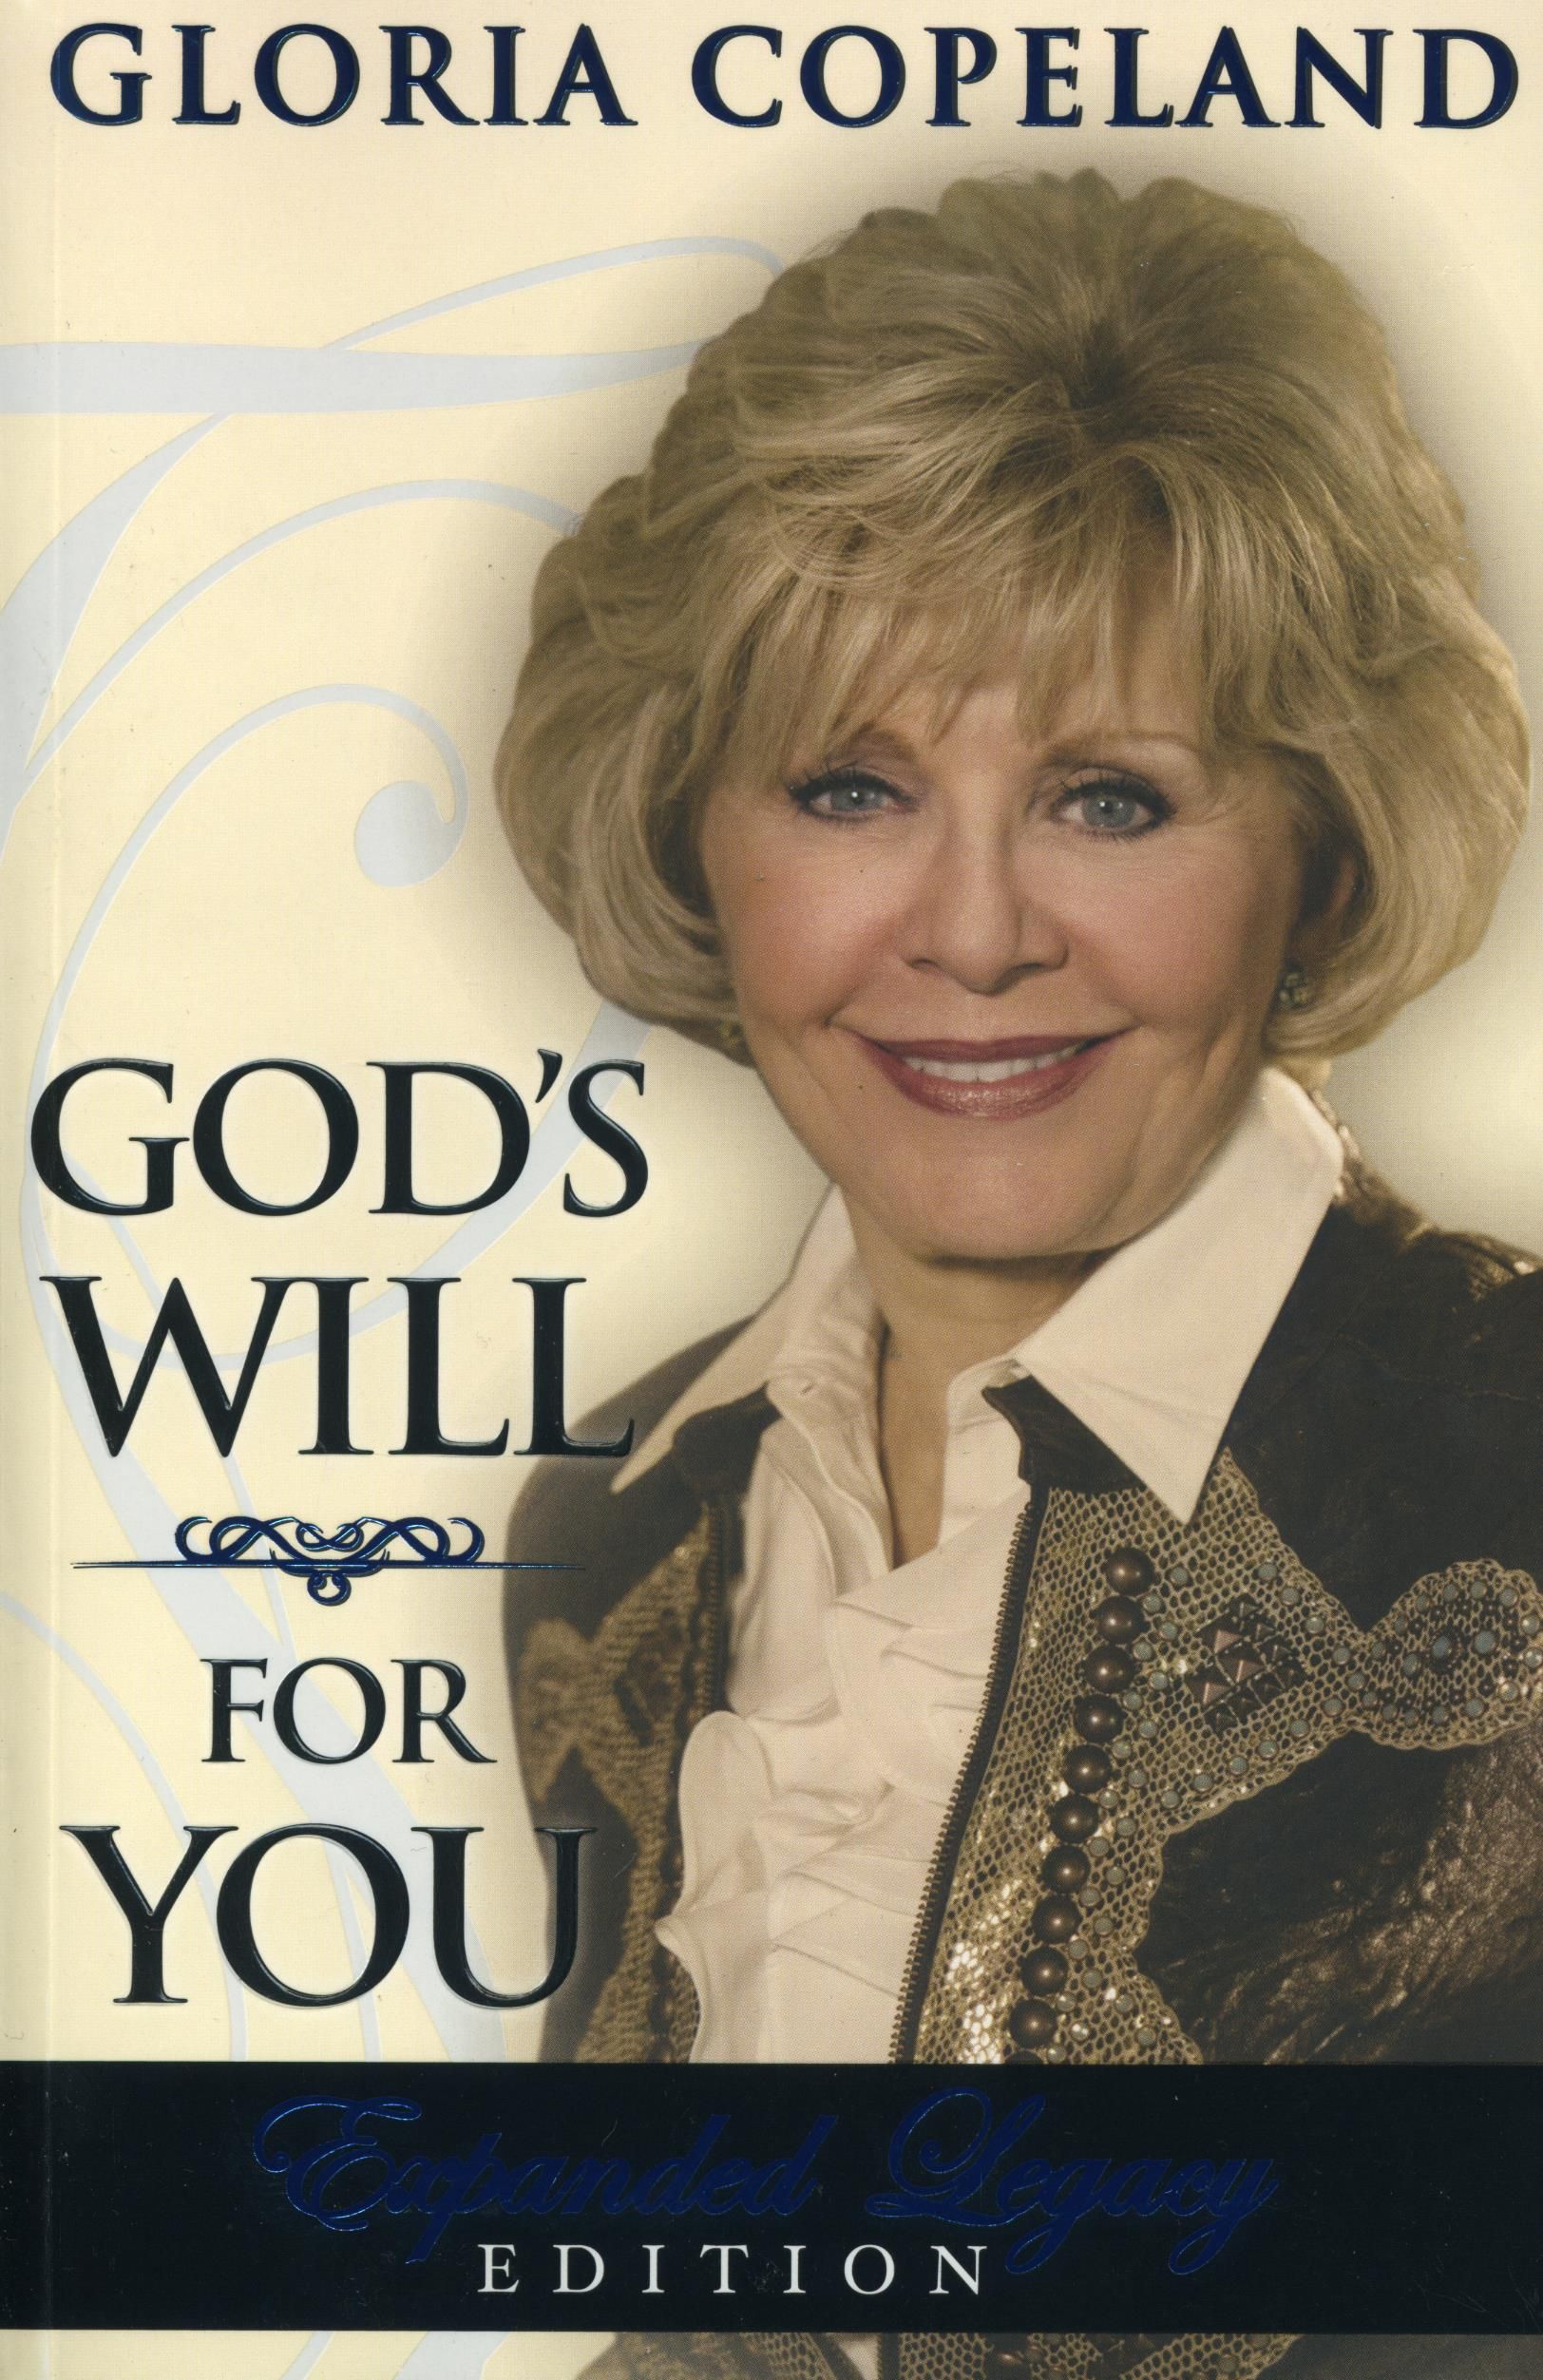 Englische Bücher - G. Copeland: God´s Will for You - Legacy Edition